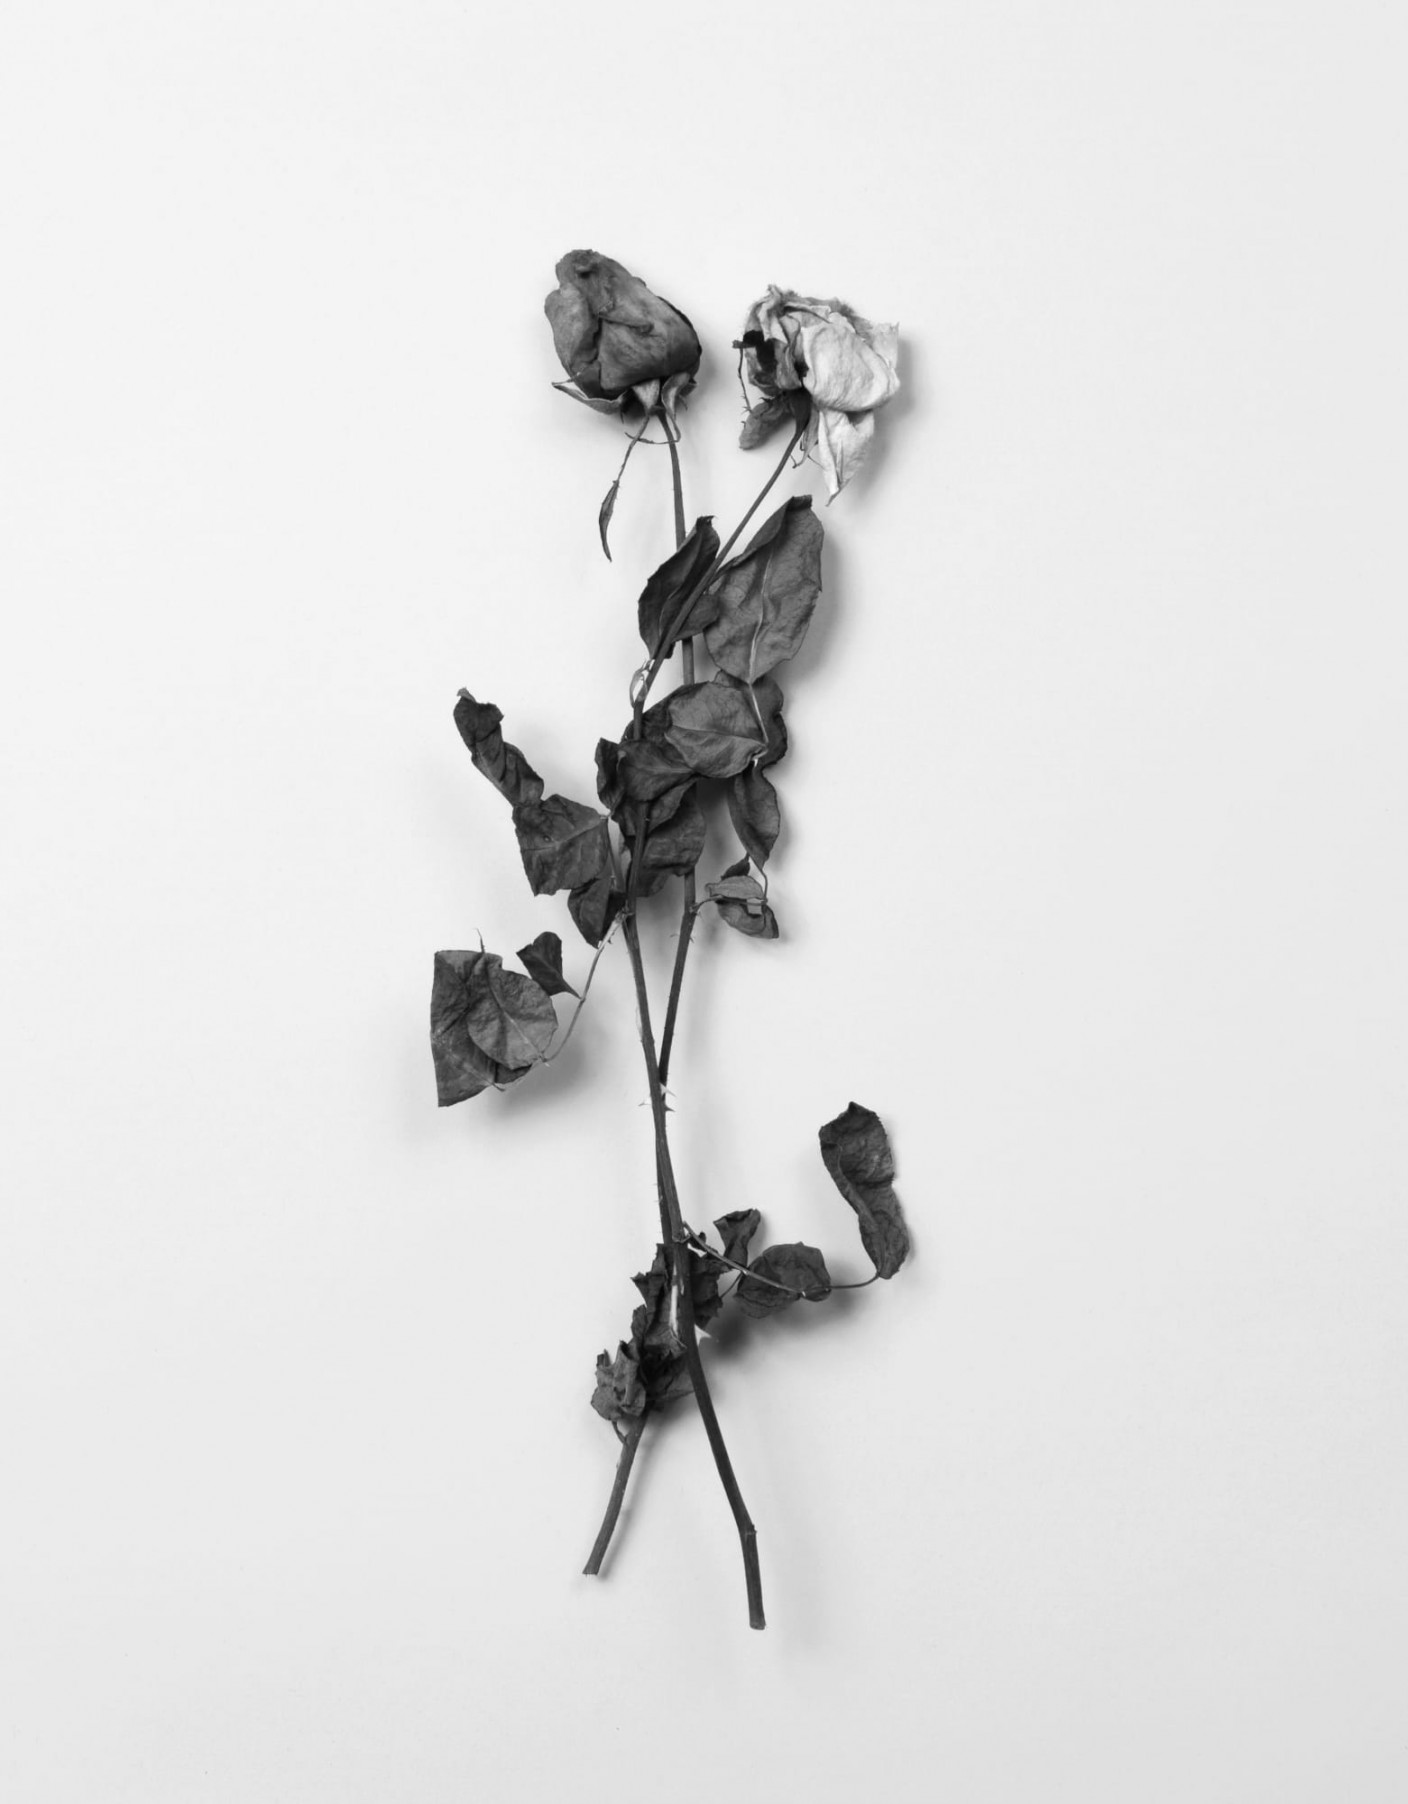 Two dried flowers, intertwined